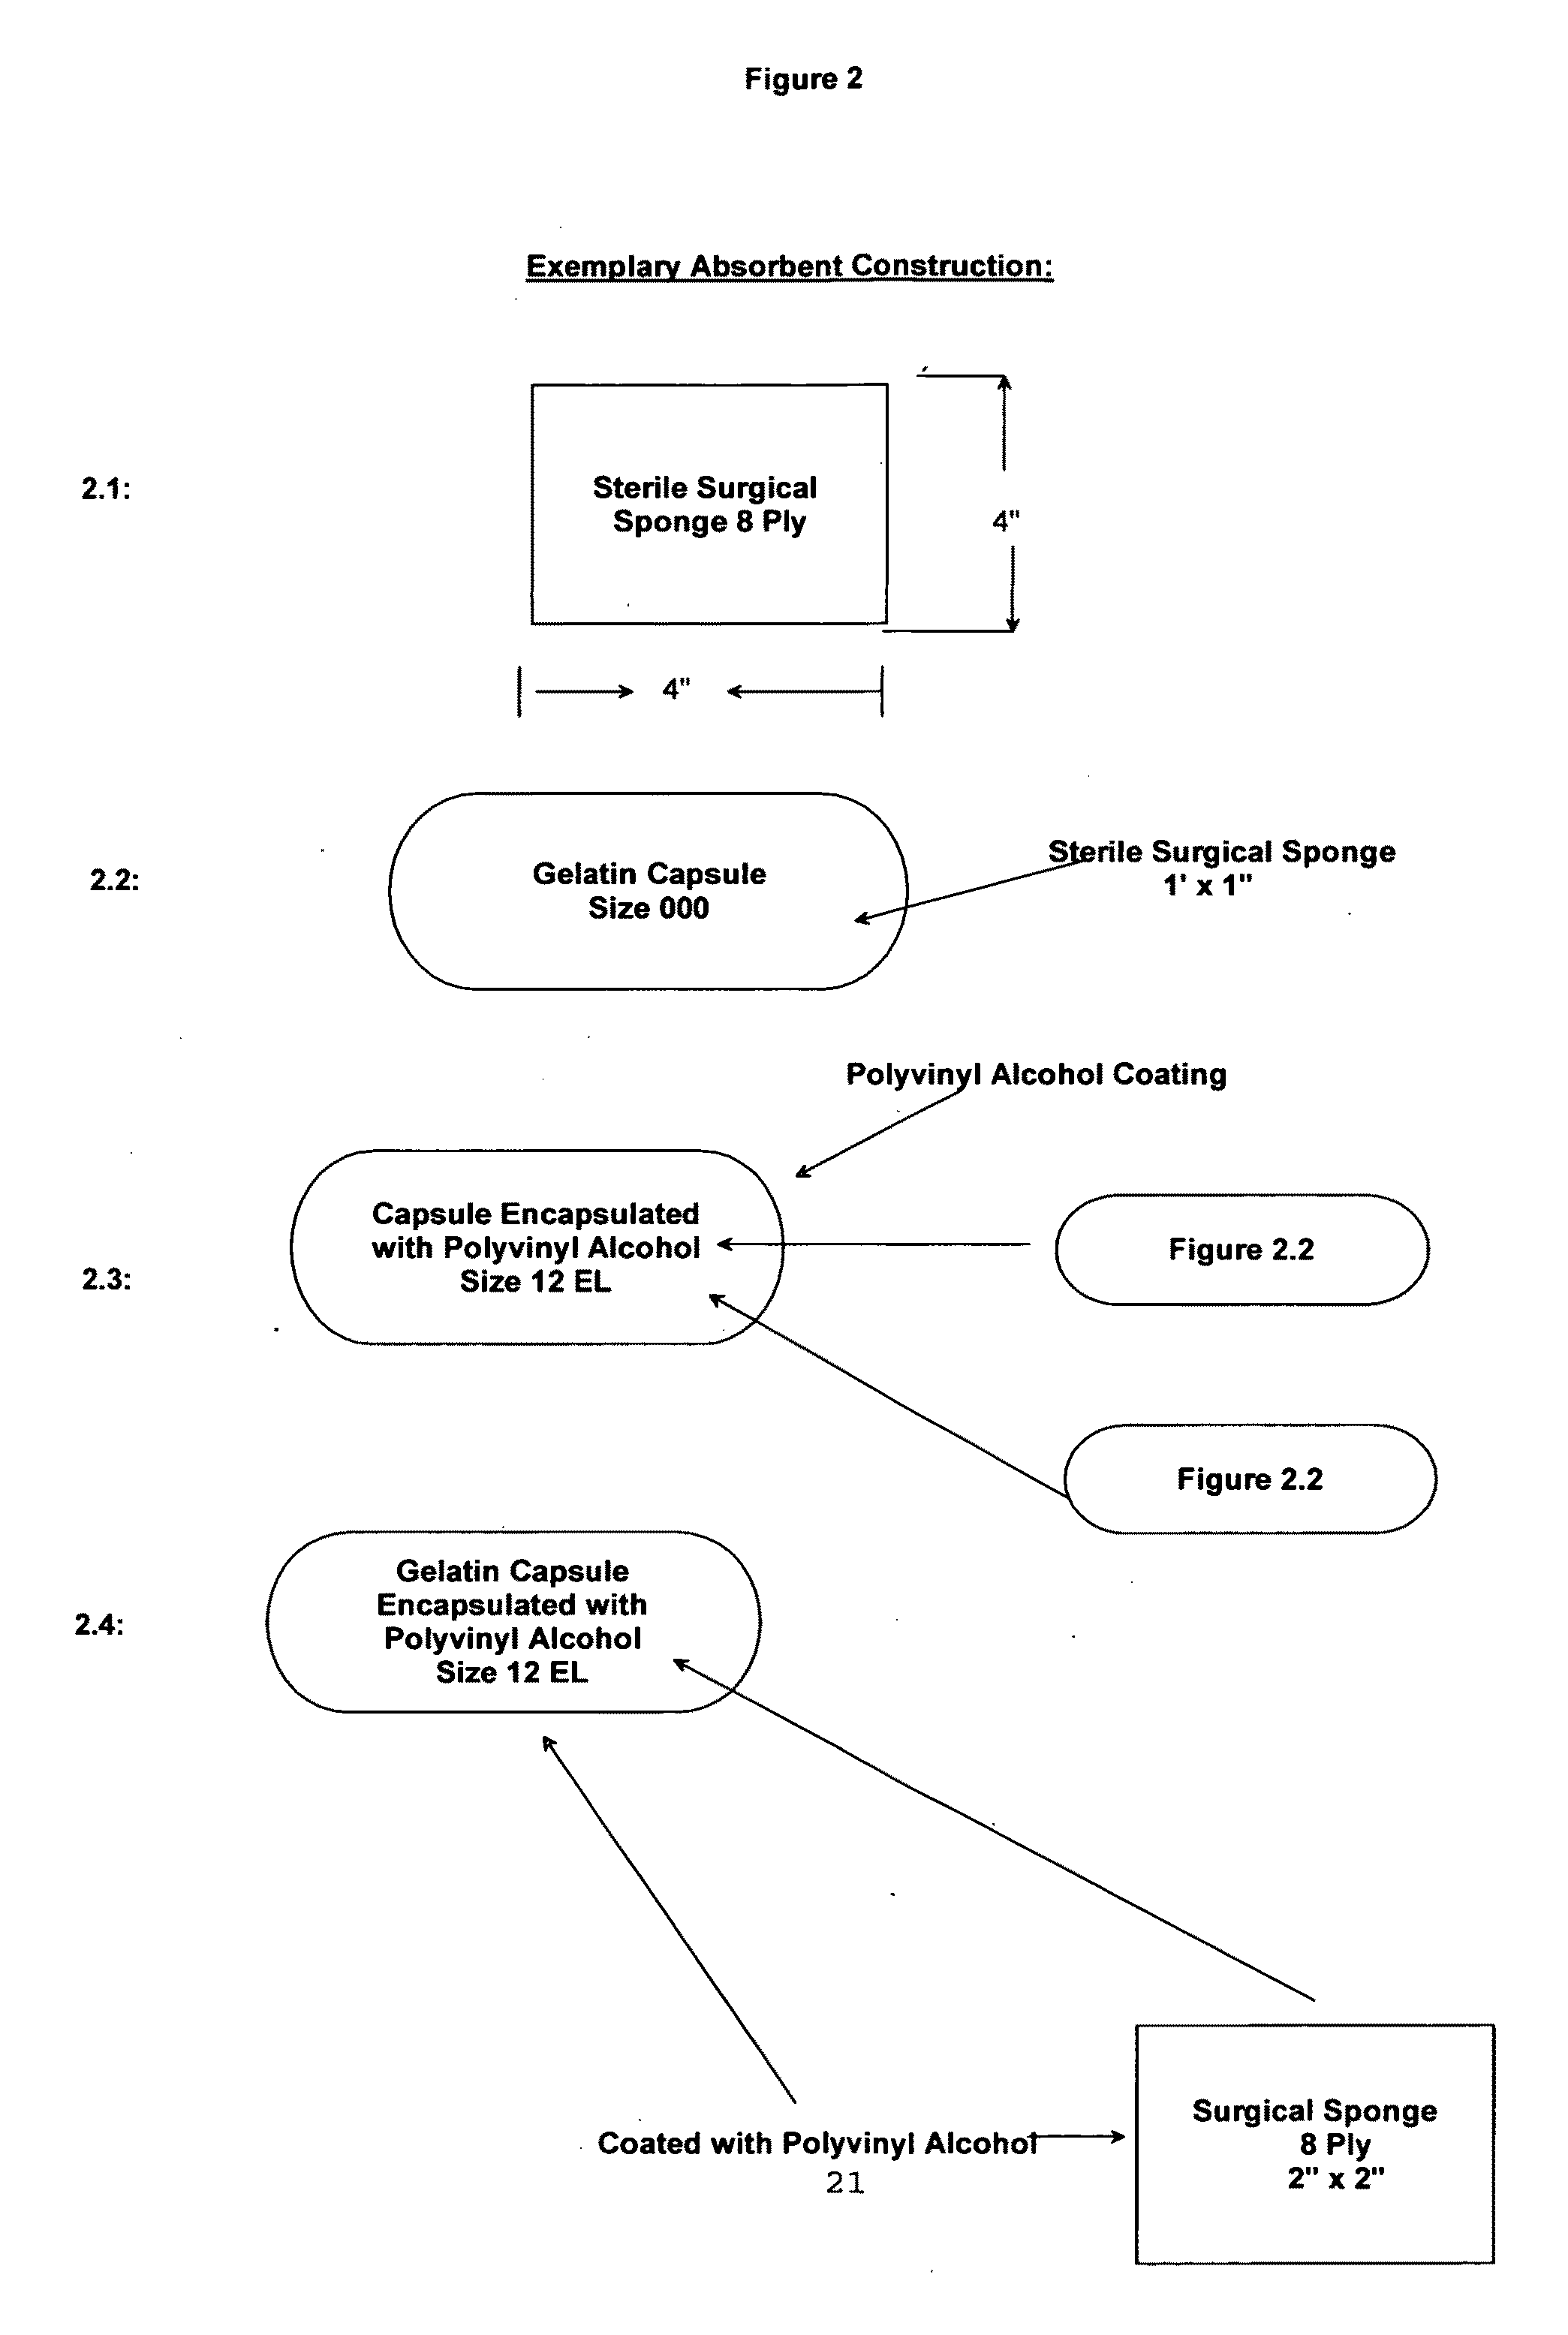 Apparatus and methods for obtaining 3-phase (liquid, gas and solid) microbiological samples from pipes, pipelines, tanks and other vessels